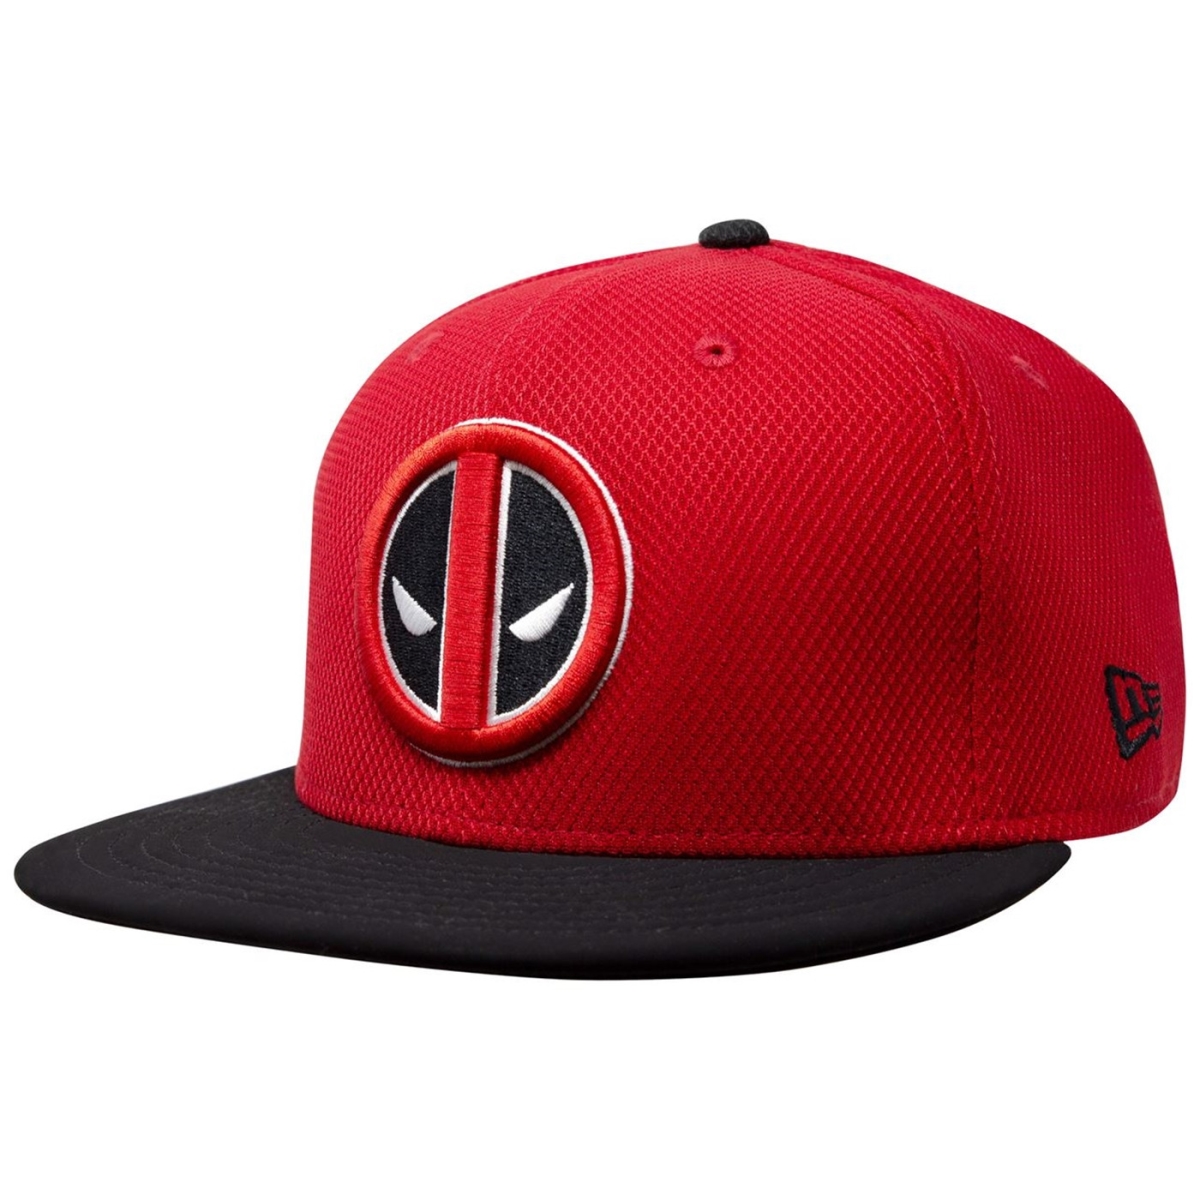 Picture of Deadpool hatdpsymrb5950-734-7 3-4 Fitted Deadpool Symbol Red & Black 59Fifty Fitted Hat - Size 7.75